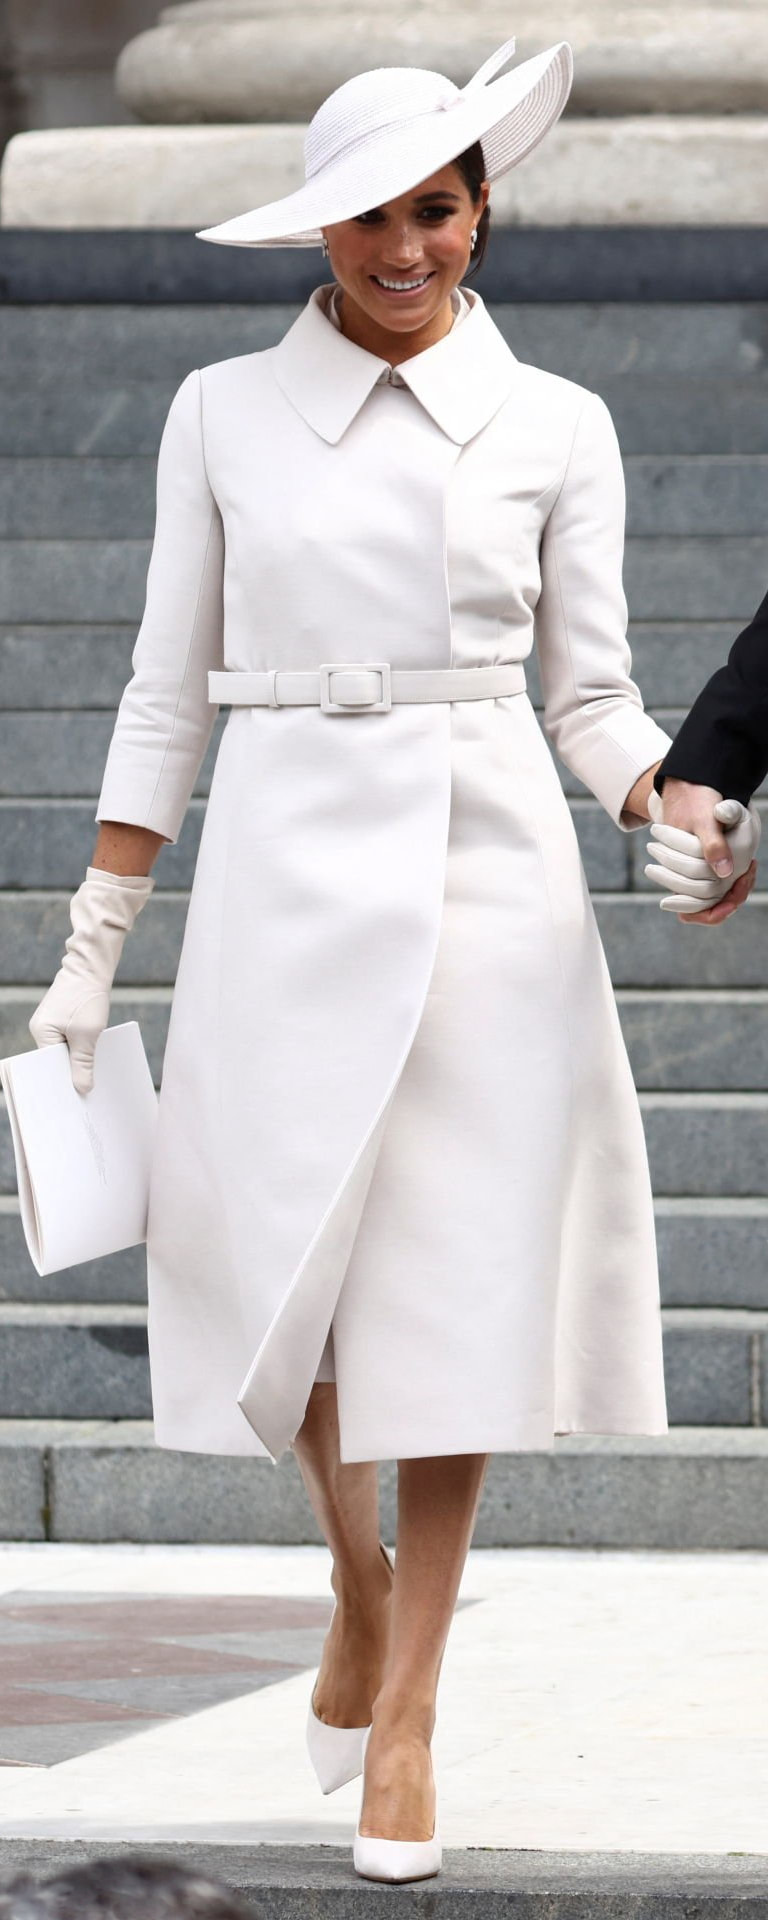 Dior D-Moi Pump in Greige as seen on Meghan Markle, the Duchess of Sussex.